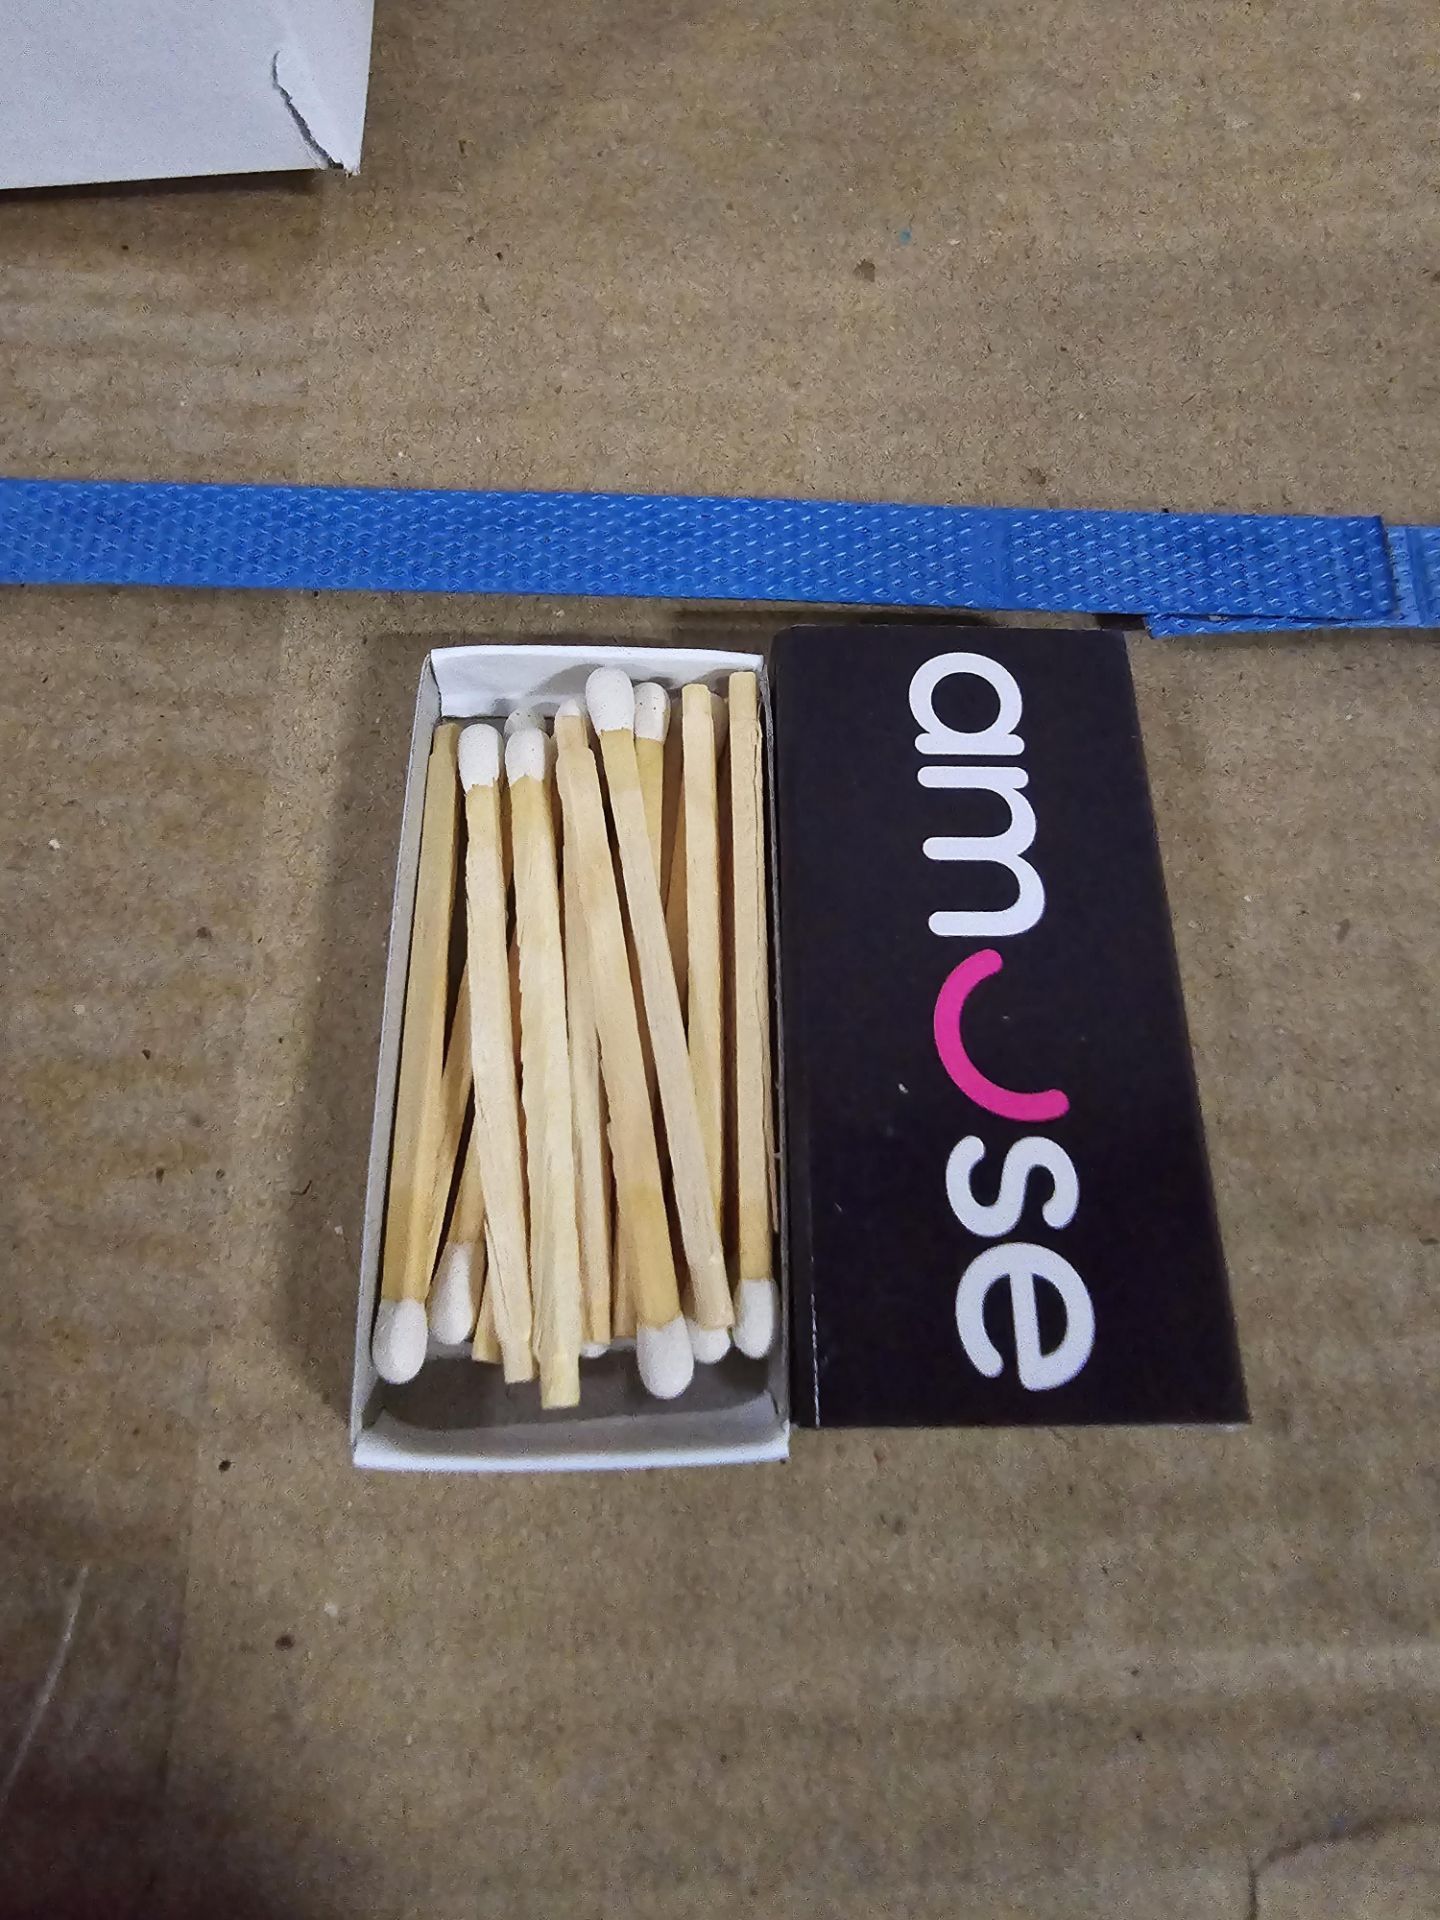 CASES OF AMUSE MATCHES 20X - 1 PL - Image 2 of 3